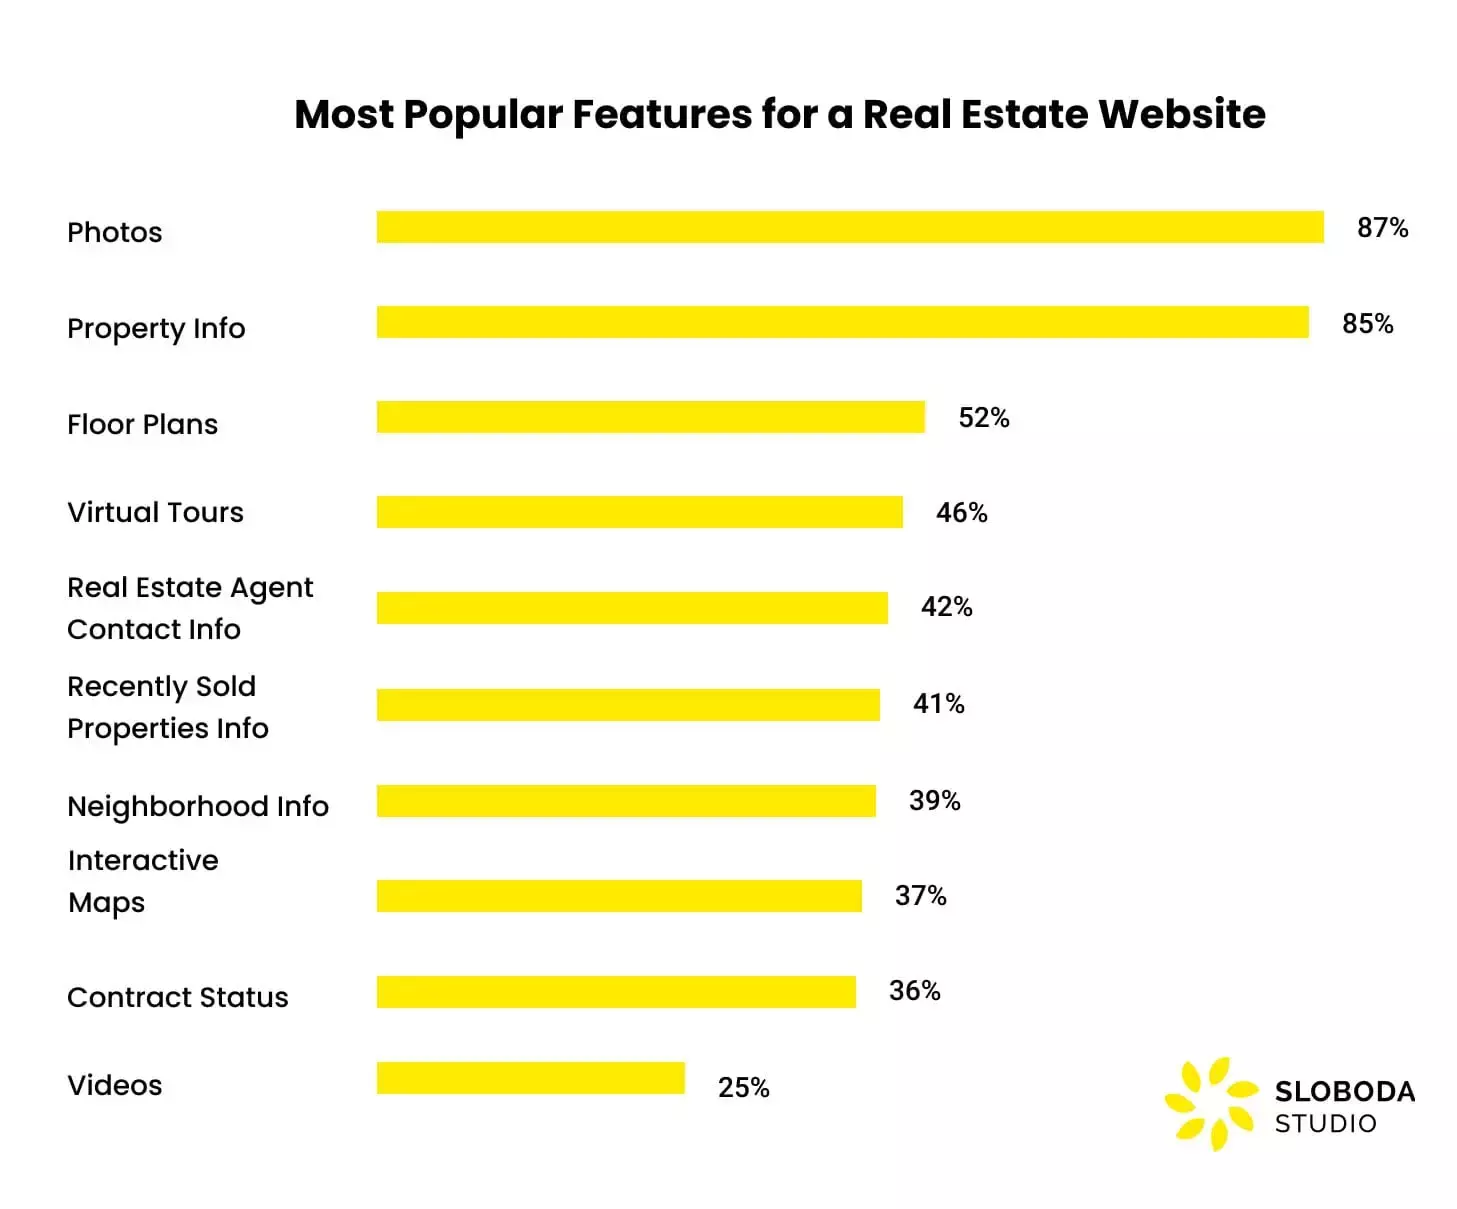 Marketplaces in the Real Estate Industry